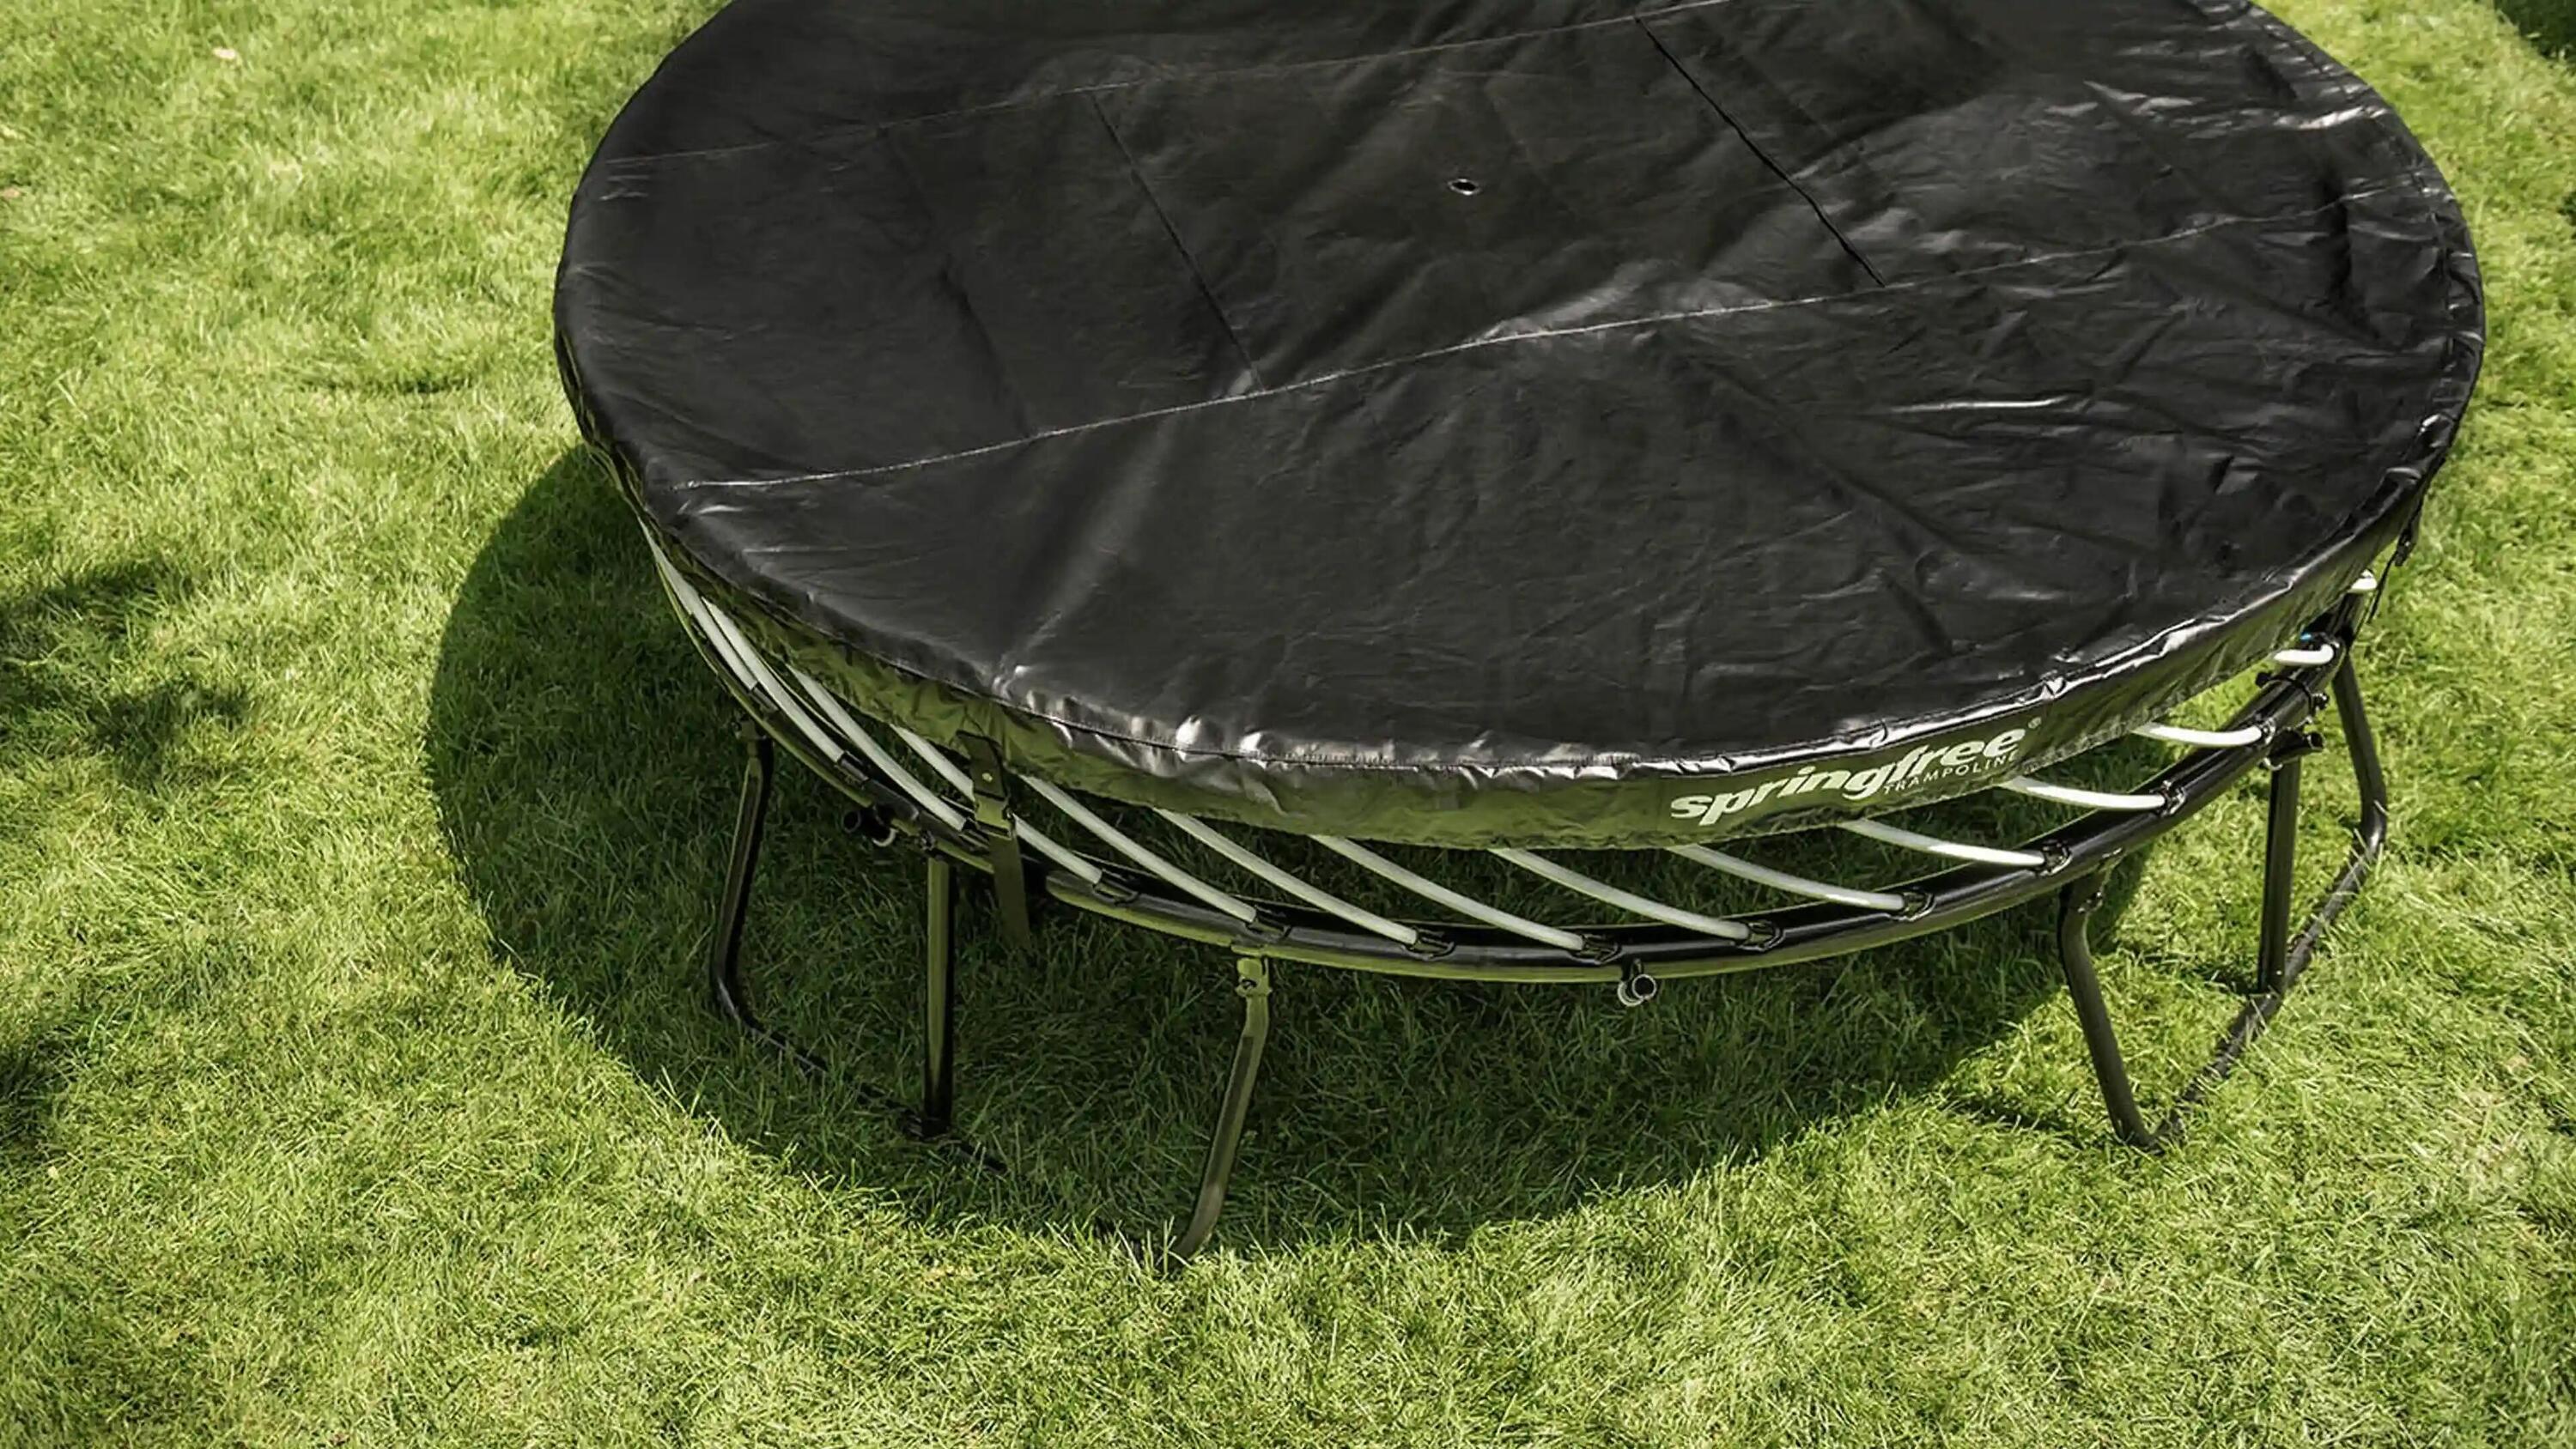 Springfree Trampoline All-Weather Cover for Large Square 2/3